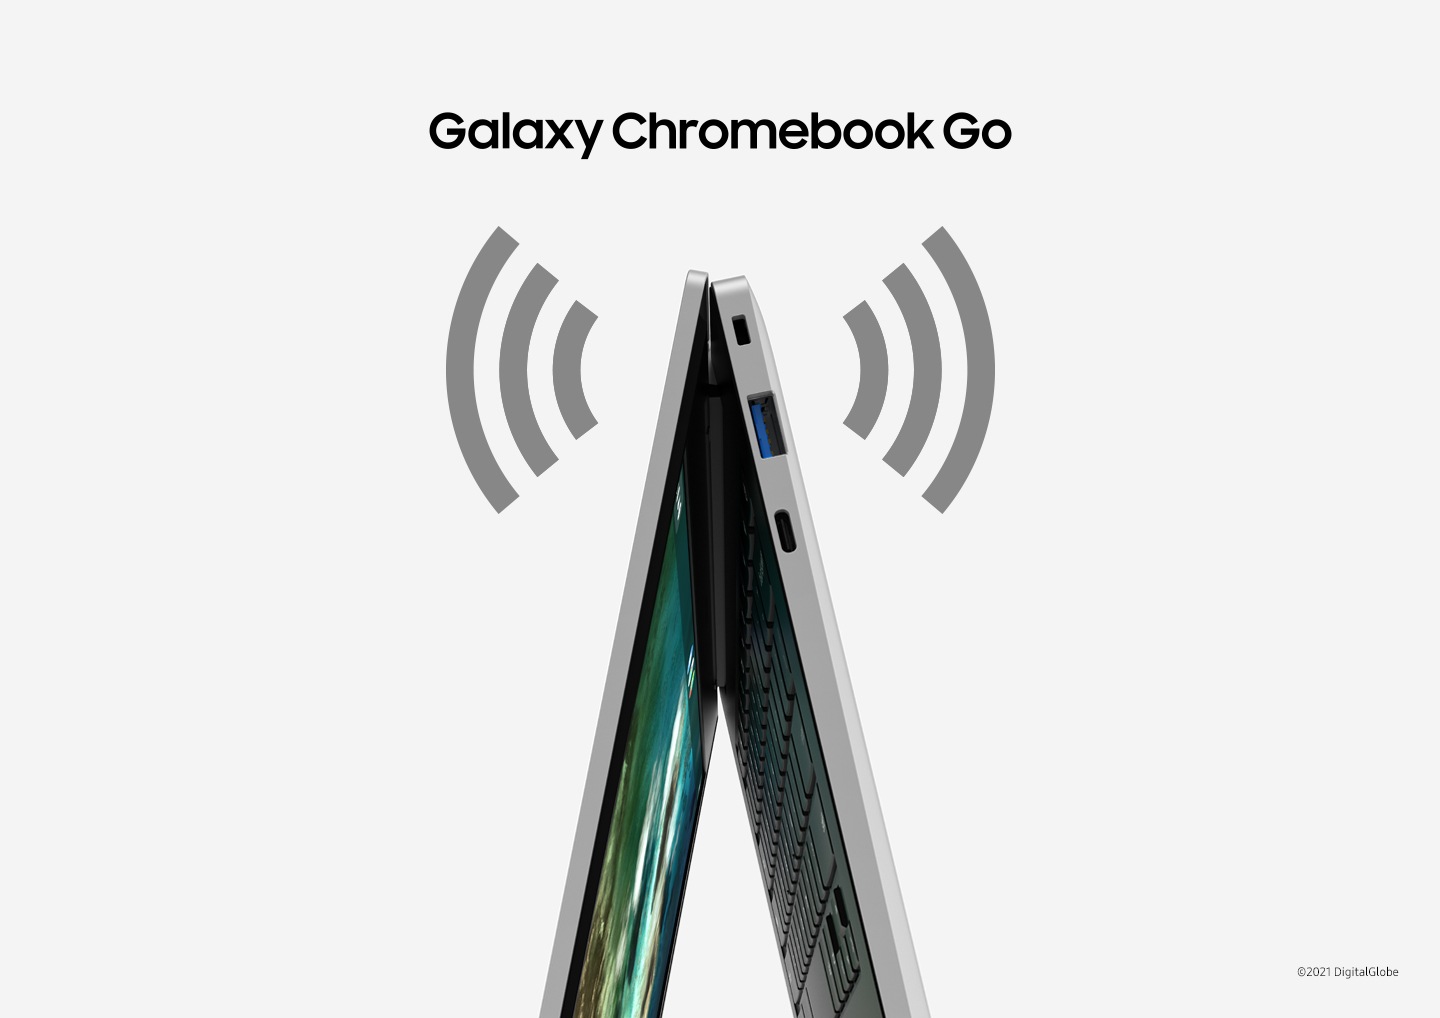 The Galaxy Chromebook Go is in tent mode, resting on the edge of the screen and keyboard, with symbols denoting wireless networks on each side.  After a copyright symbol, the text at the bottom right reads "2021 DigitalGlobe."